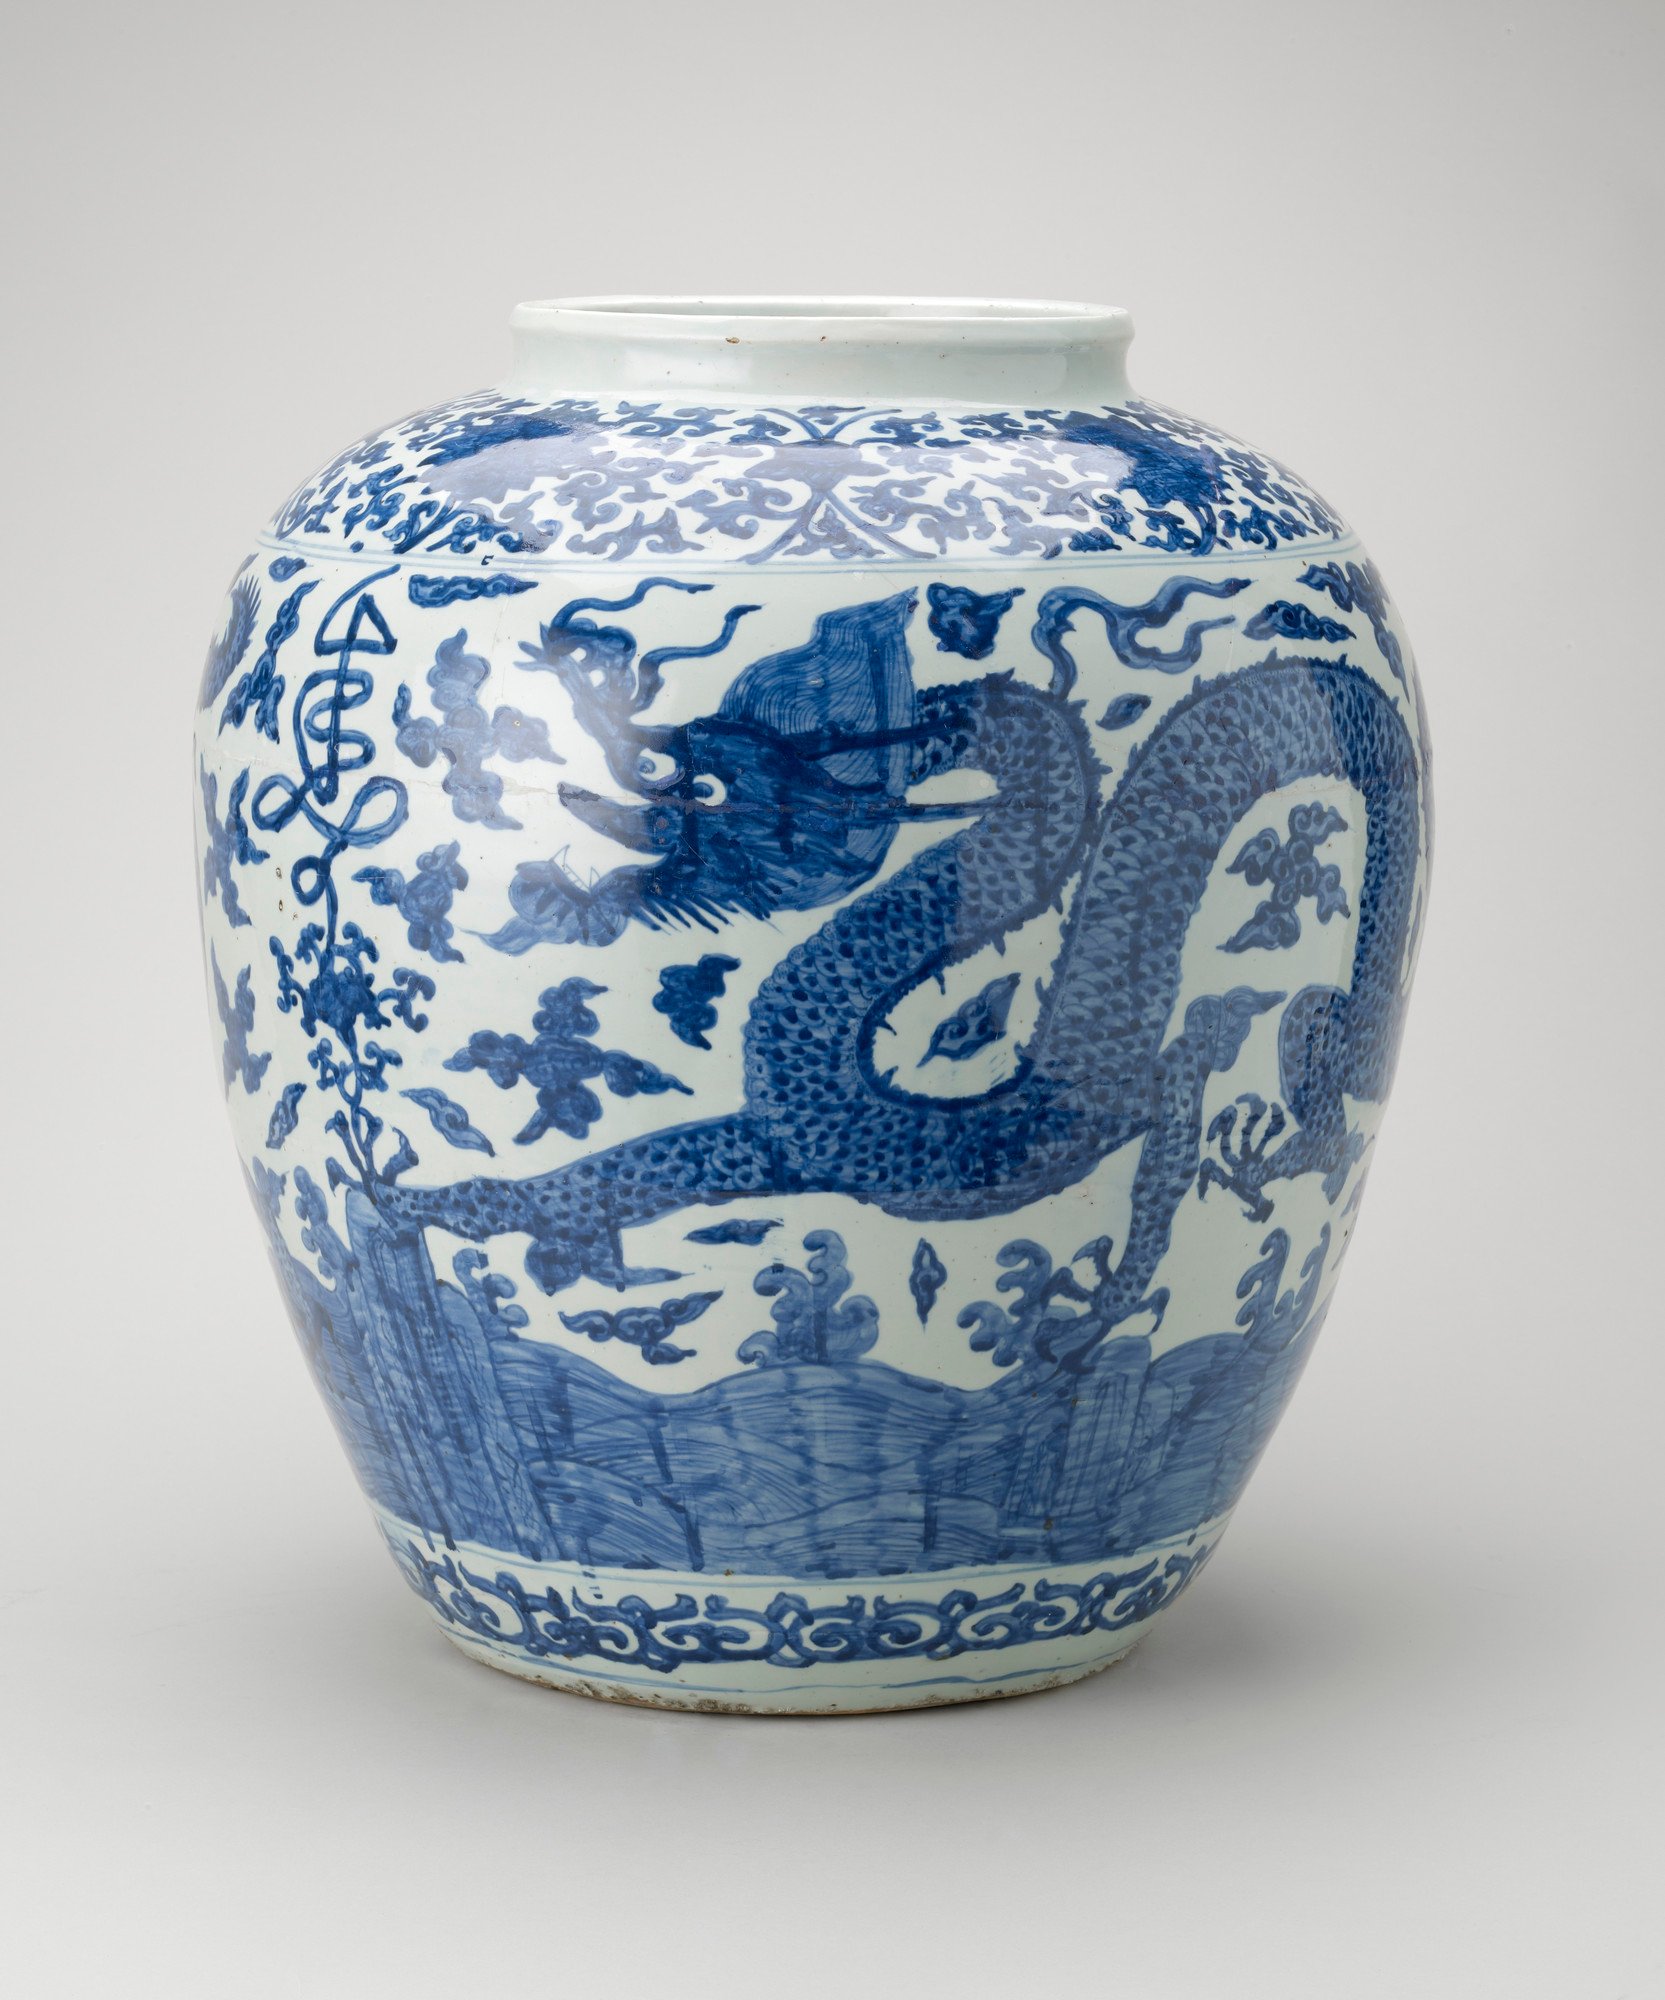 An ovoid-shaped Chinese Ming period porcelain jar painted in rich blue around the sides with two five-clawed dragons among clouds and with rocks and waves below. Round the shoulder a stylised shou (long life character) seems to grow out of the lotus scrol